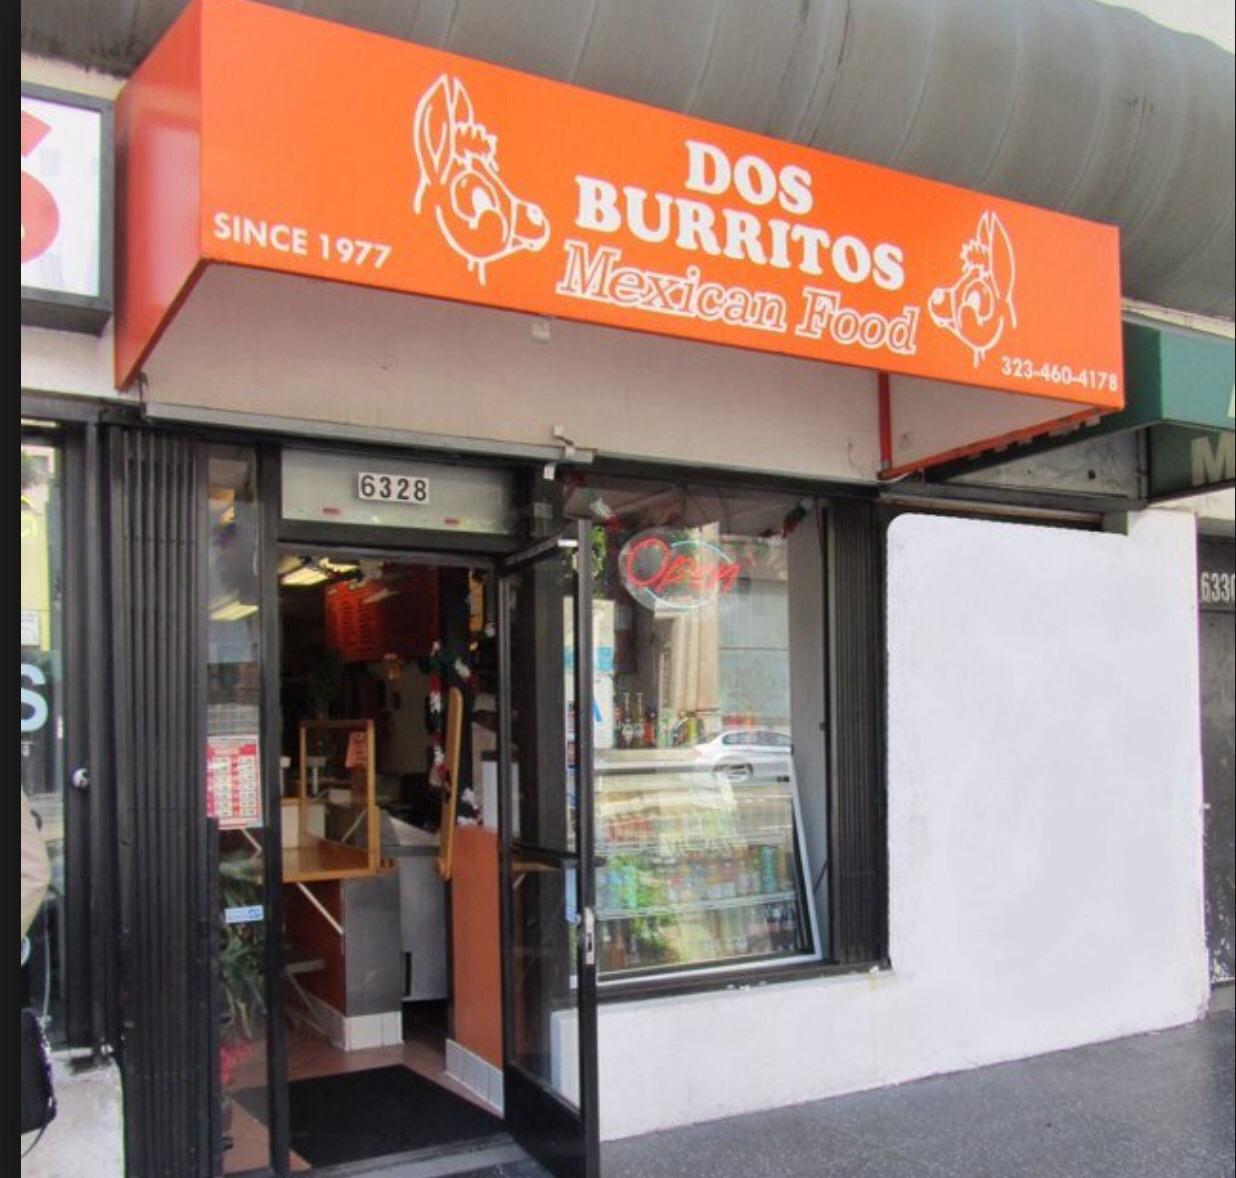 Cover image of this place Dos Burritos